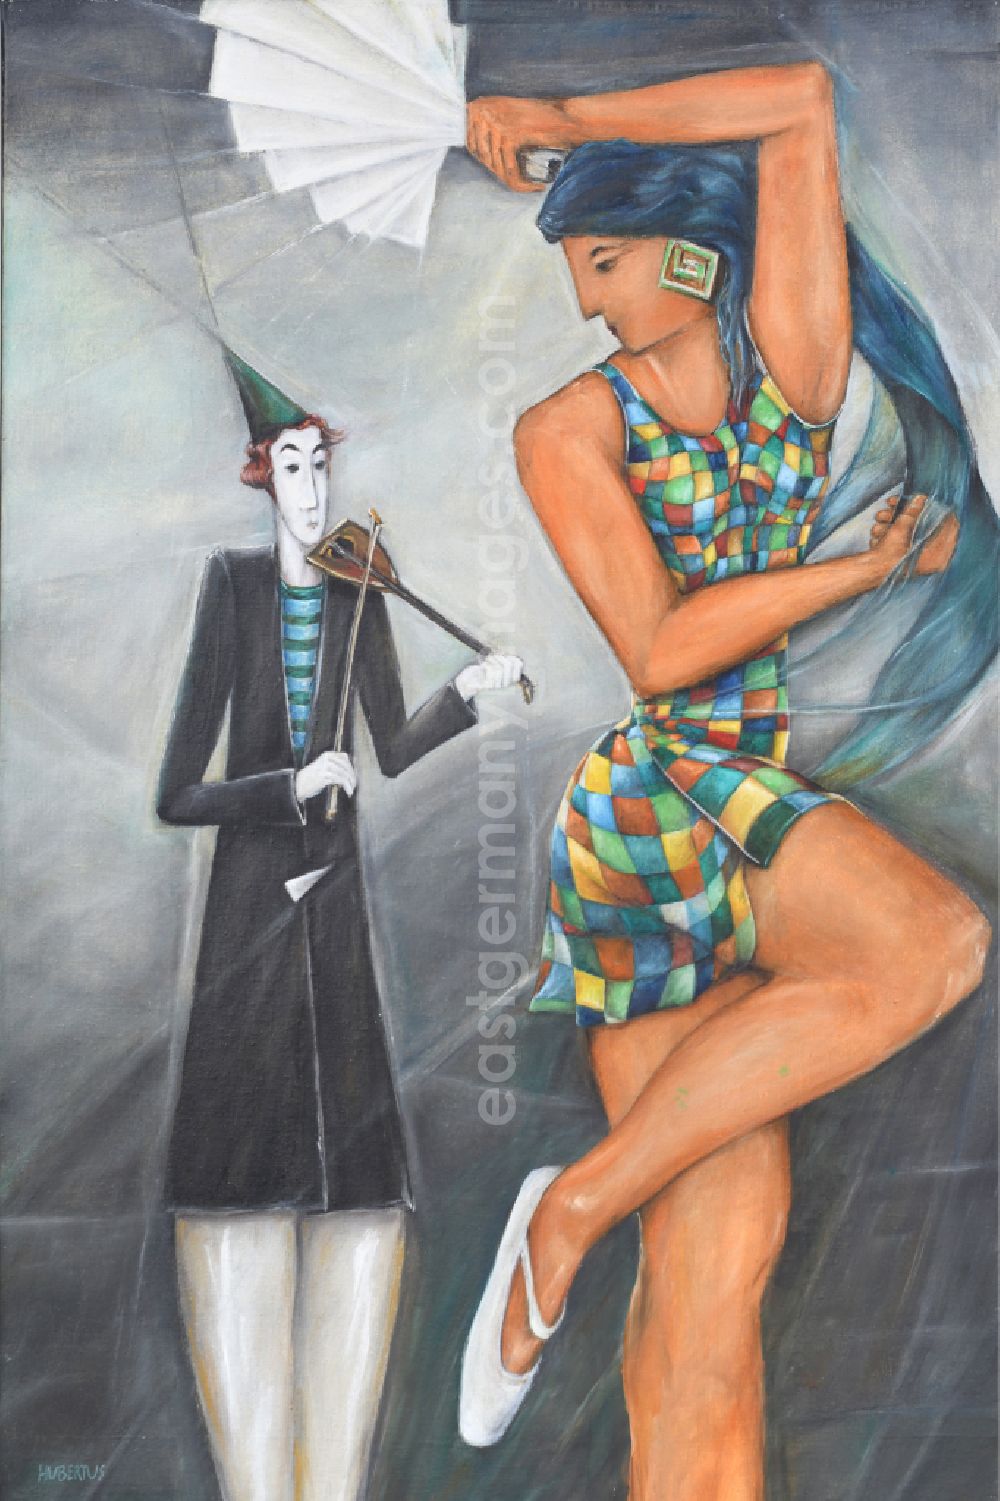 GDR image archive: Berlin - Oil on canvas Play me my Song and I dances 60x9